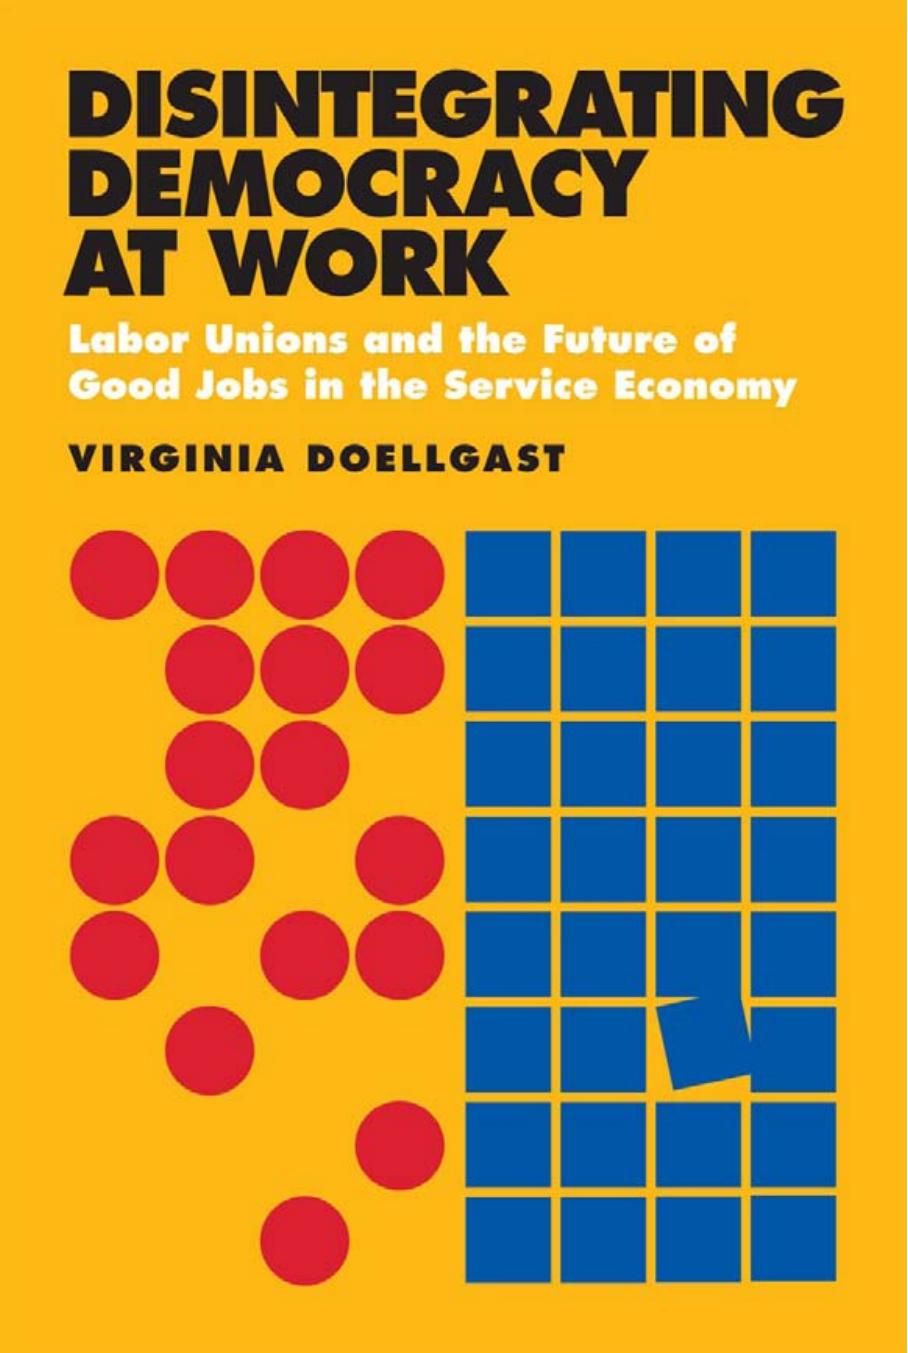 Disintegrating Democracy at Work: Labor Unions and the Future of Good Jobs in the Service Economy by by Virginia Doellgast